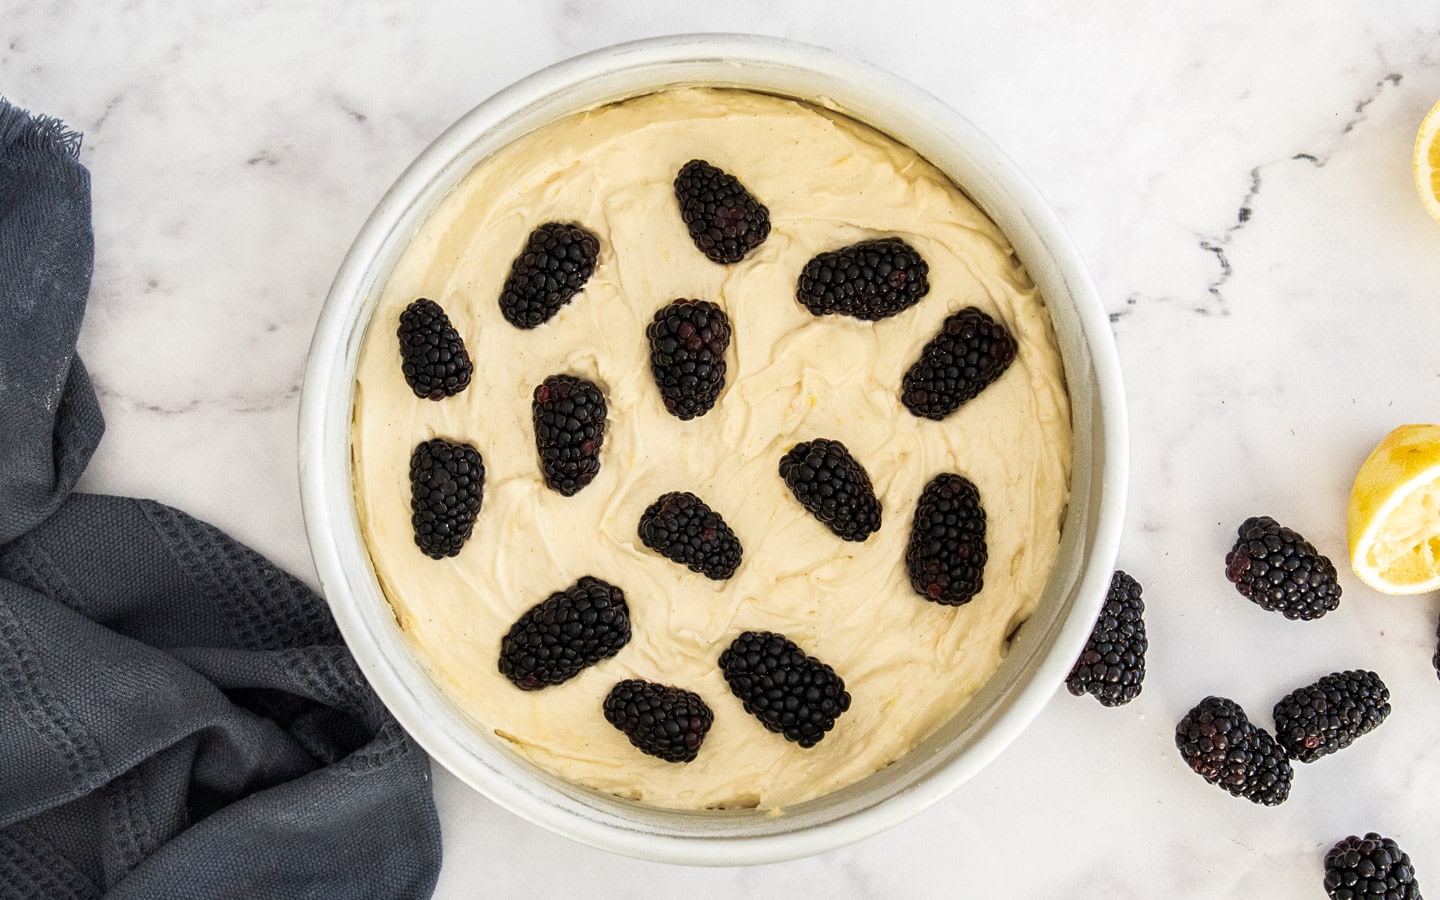 The batter in a cake pan dotted with blackberries.